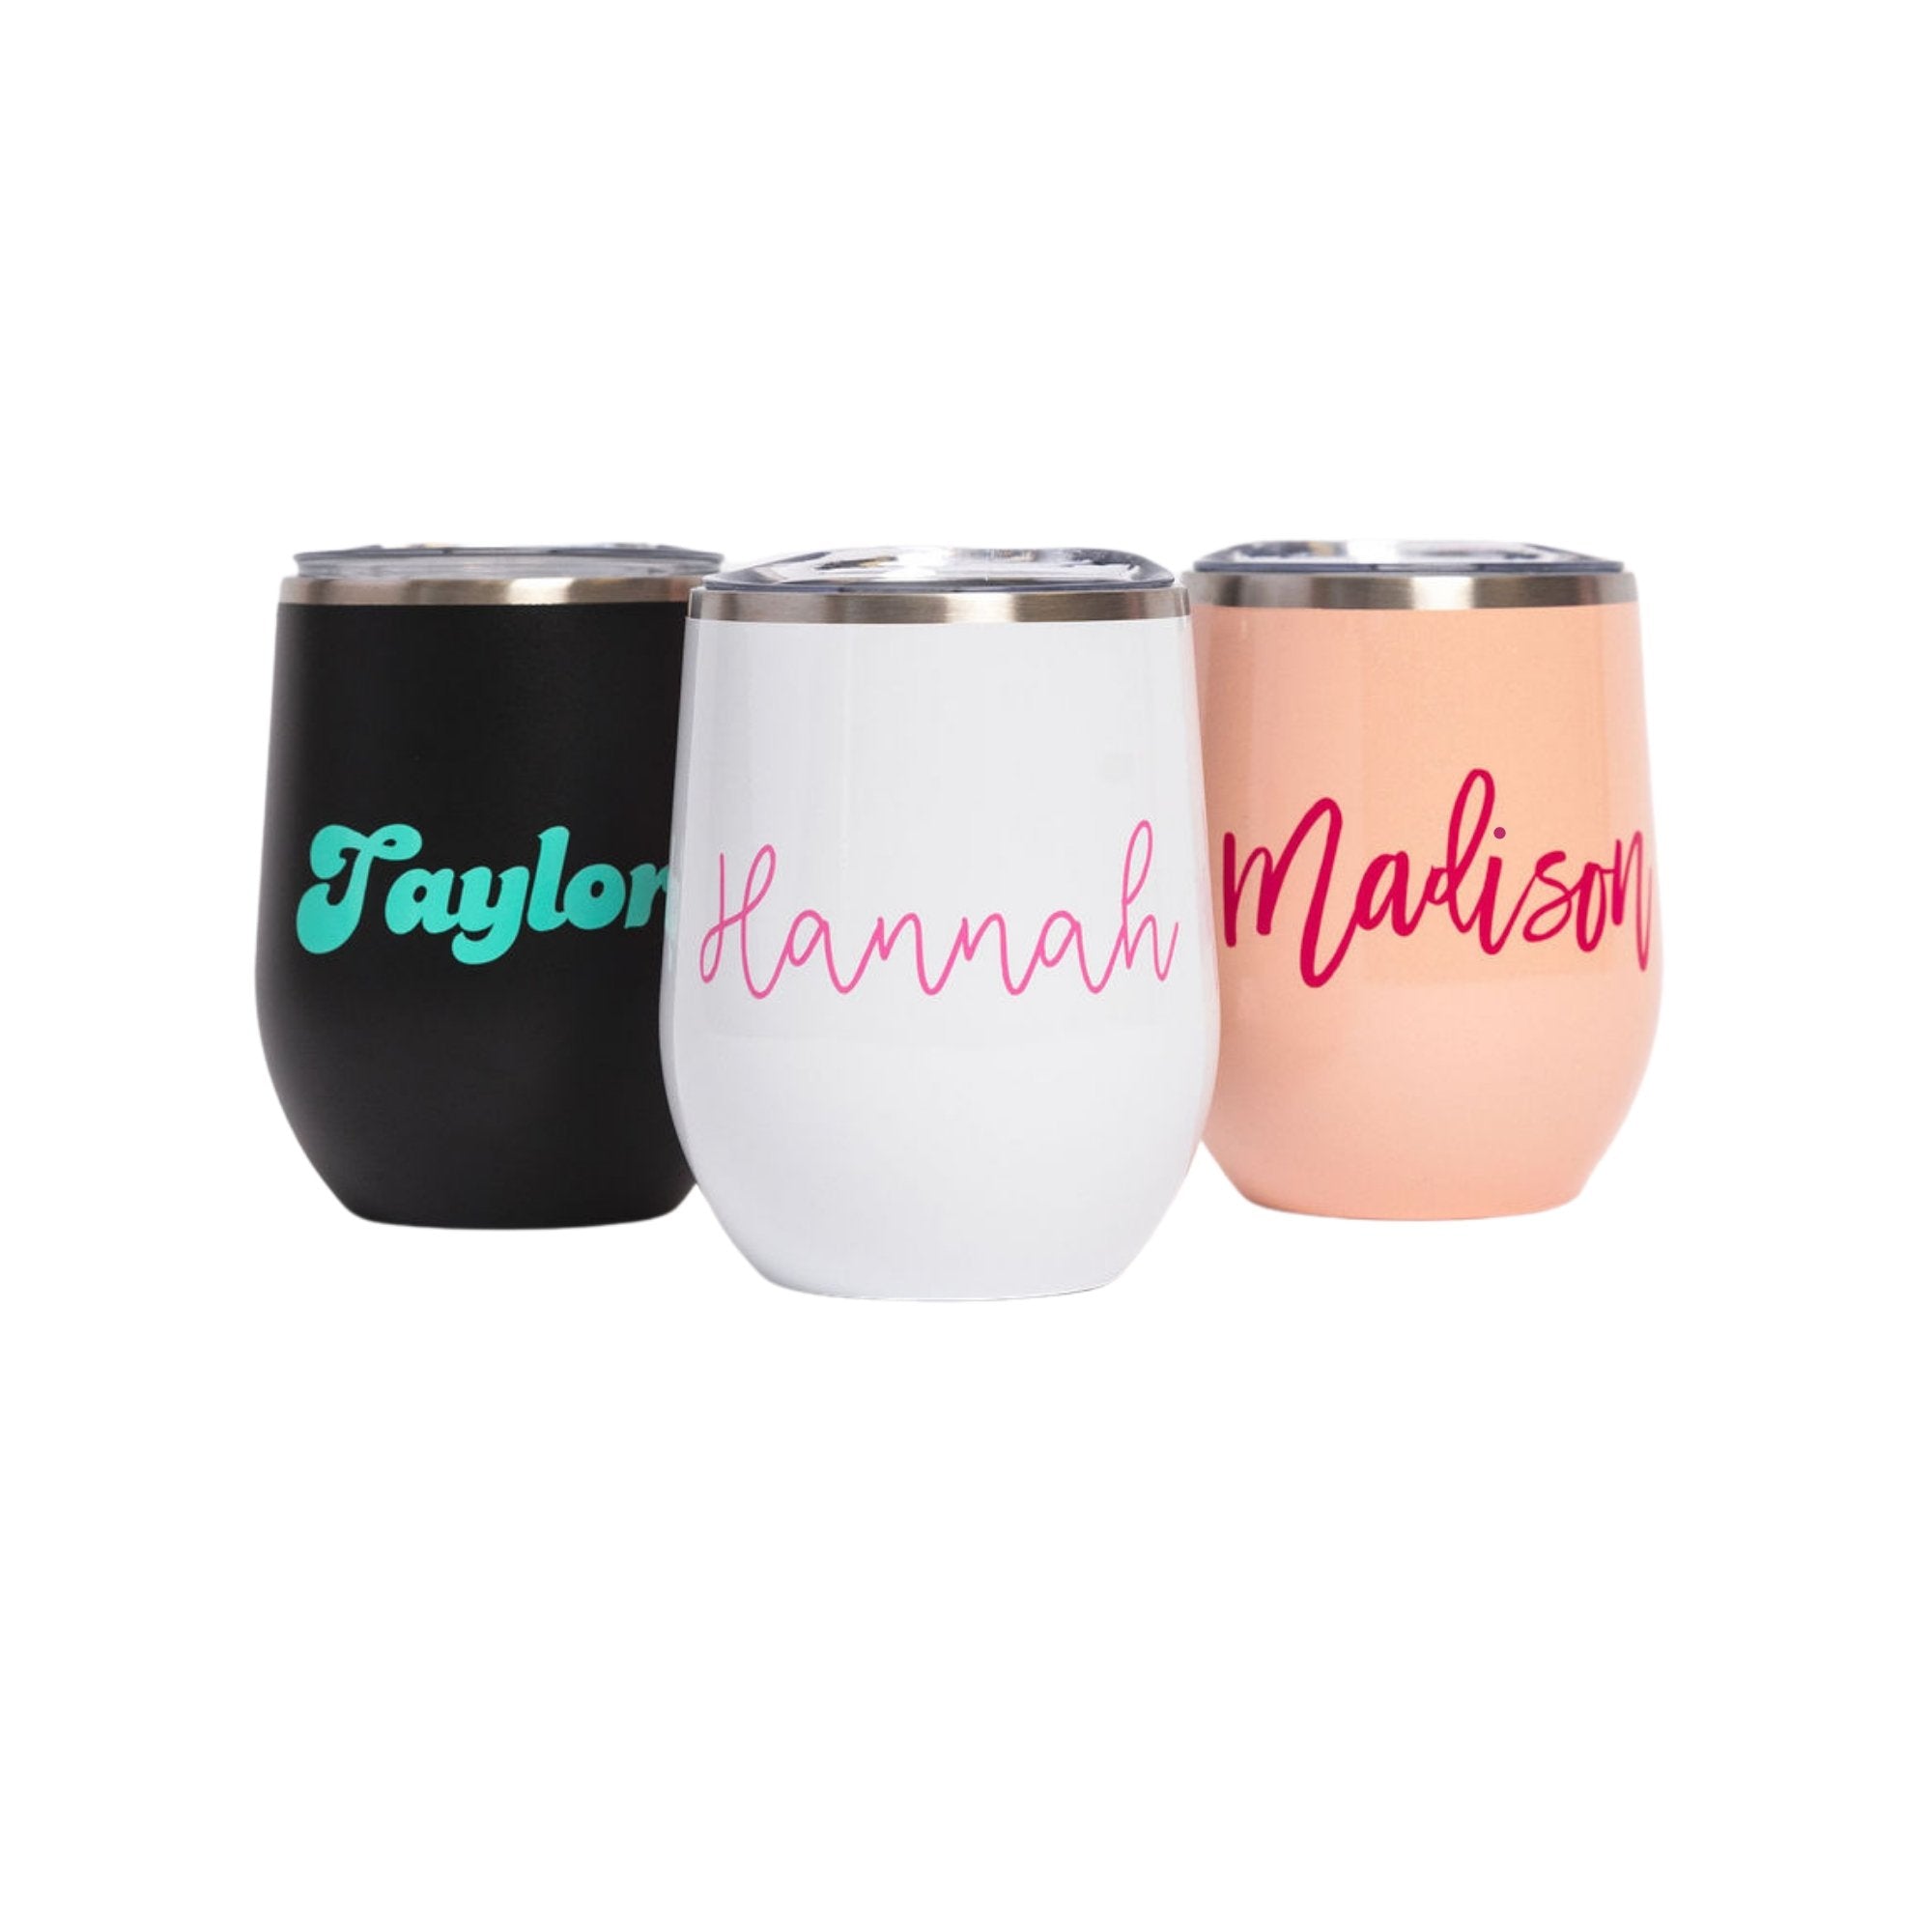 Just A Small Town Girl - Personalized Tumbler Cup - Birthday Gift For  Country Girl, Cowgirl